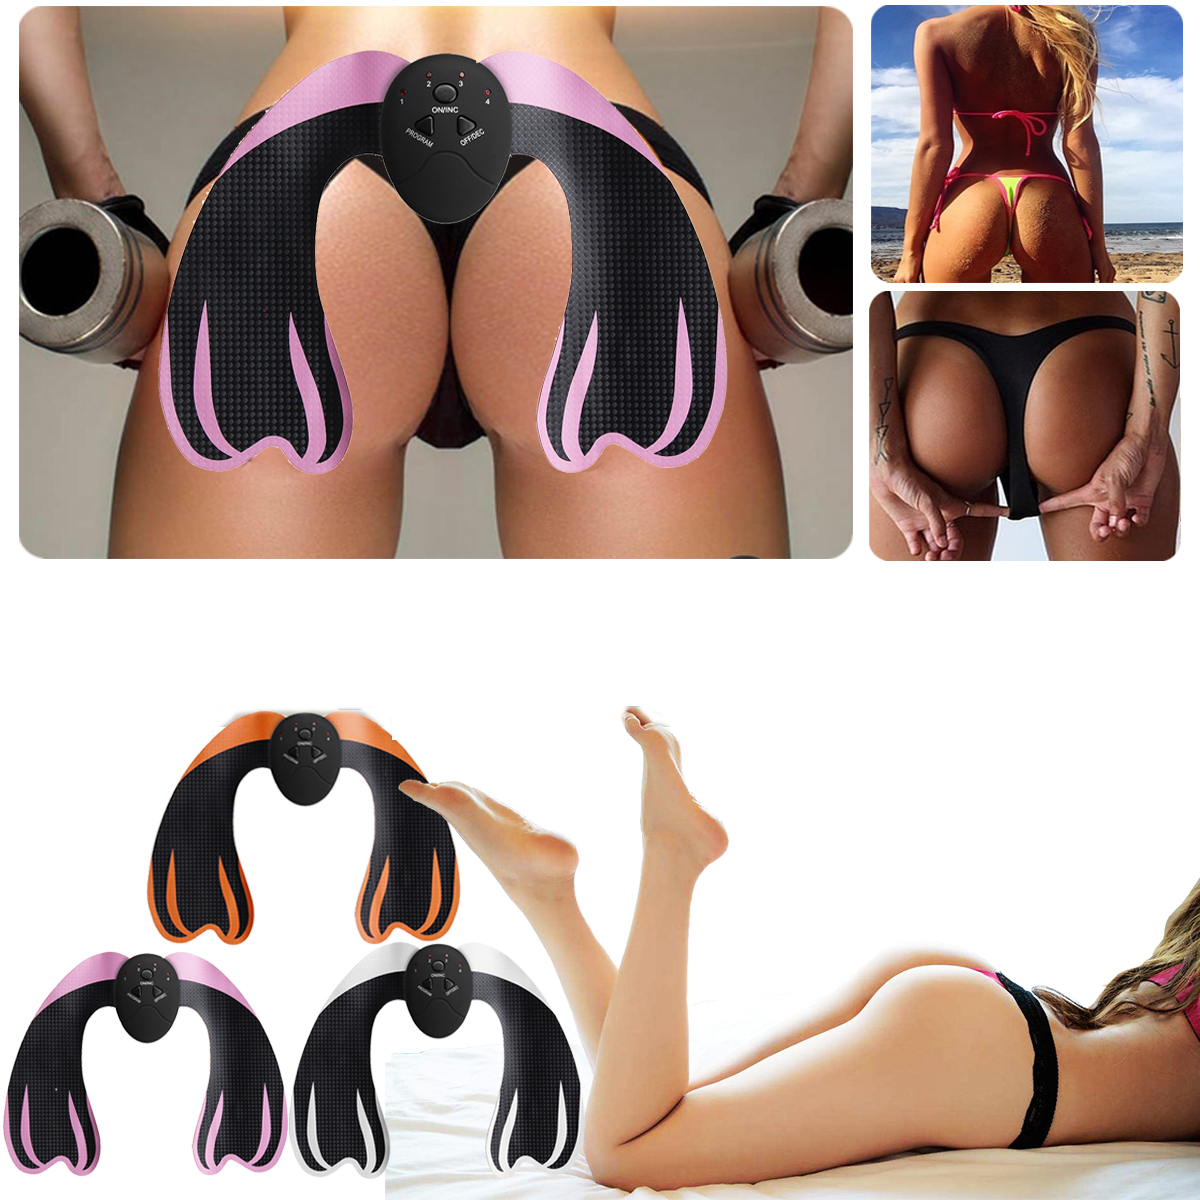 

KALOAD 6 Modes EMS Hip Lifting Trainer Buttocks Shaping Body Beauty Massager Fitness Equipment